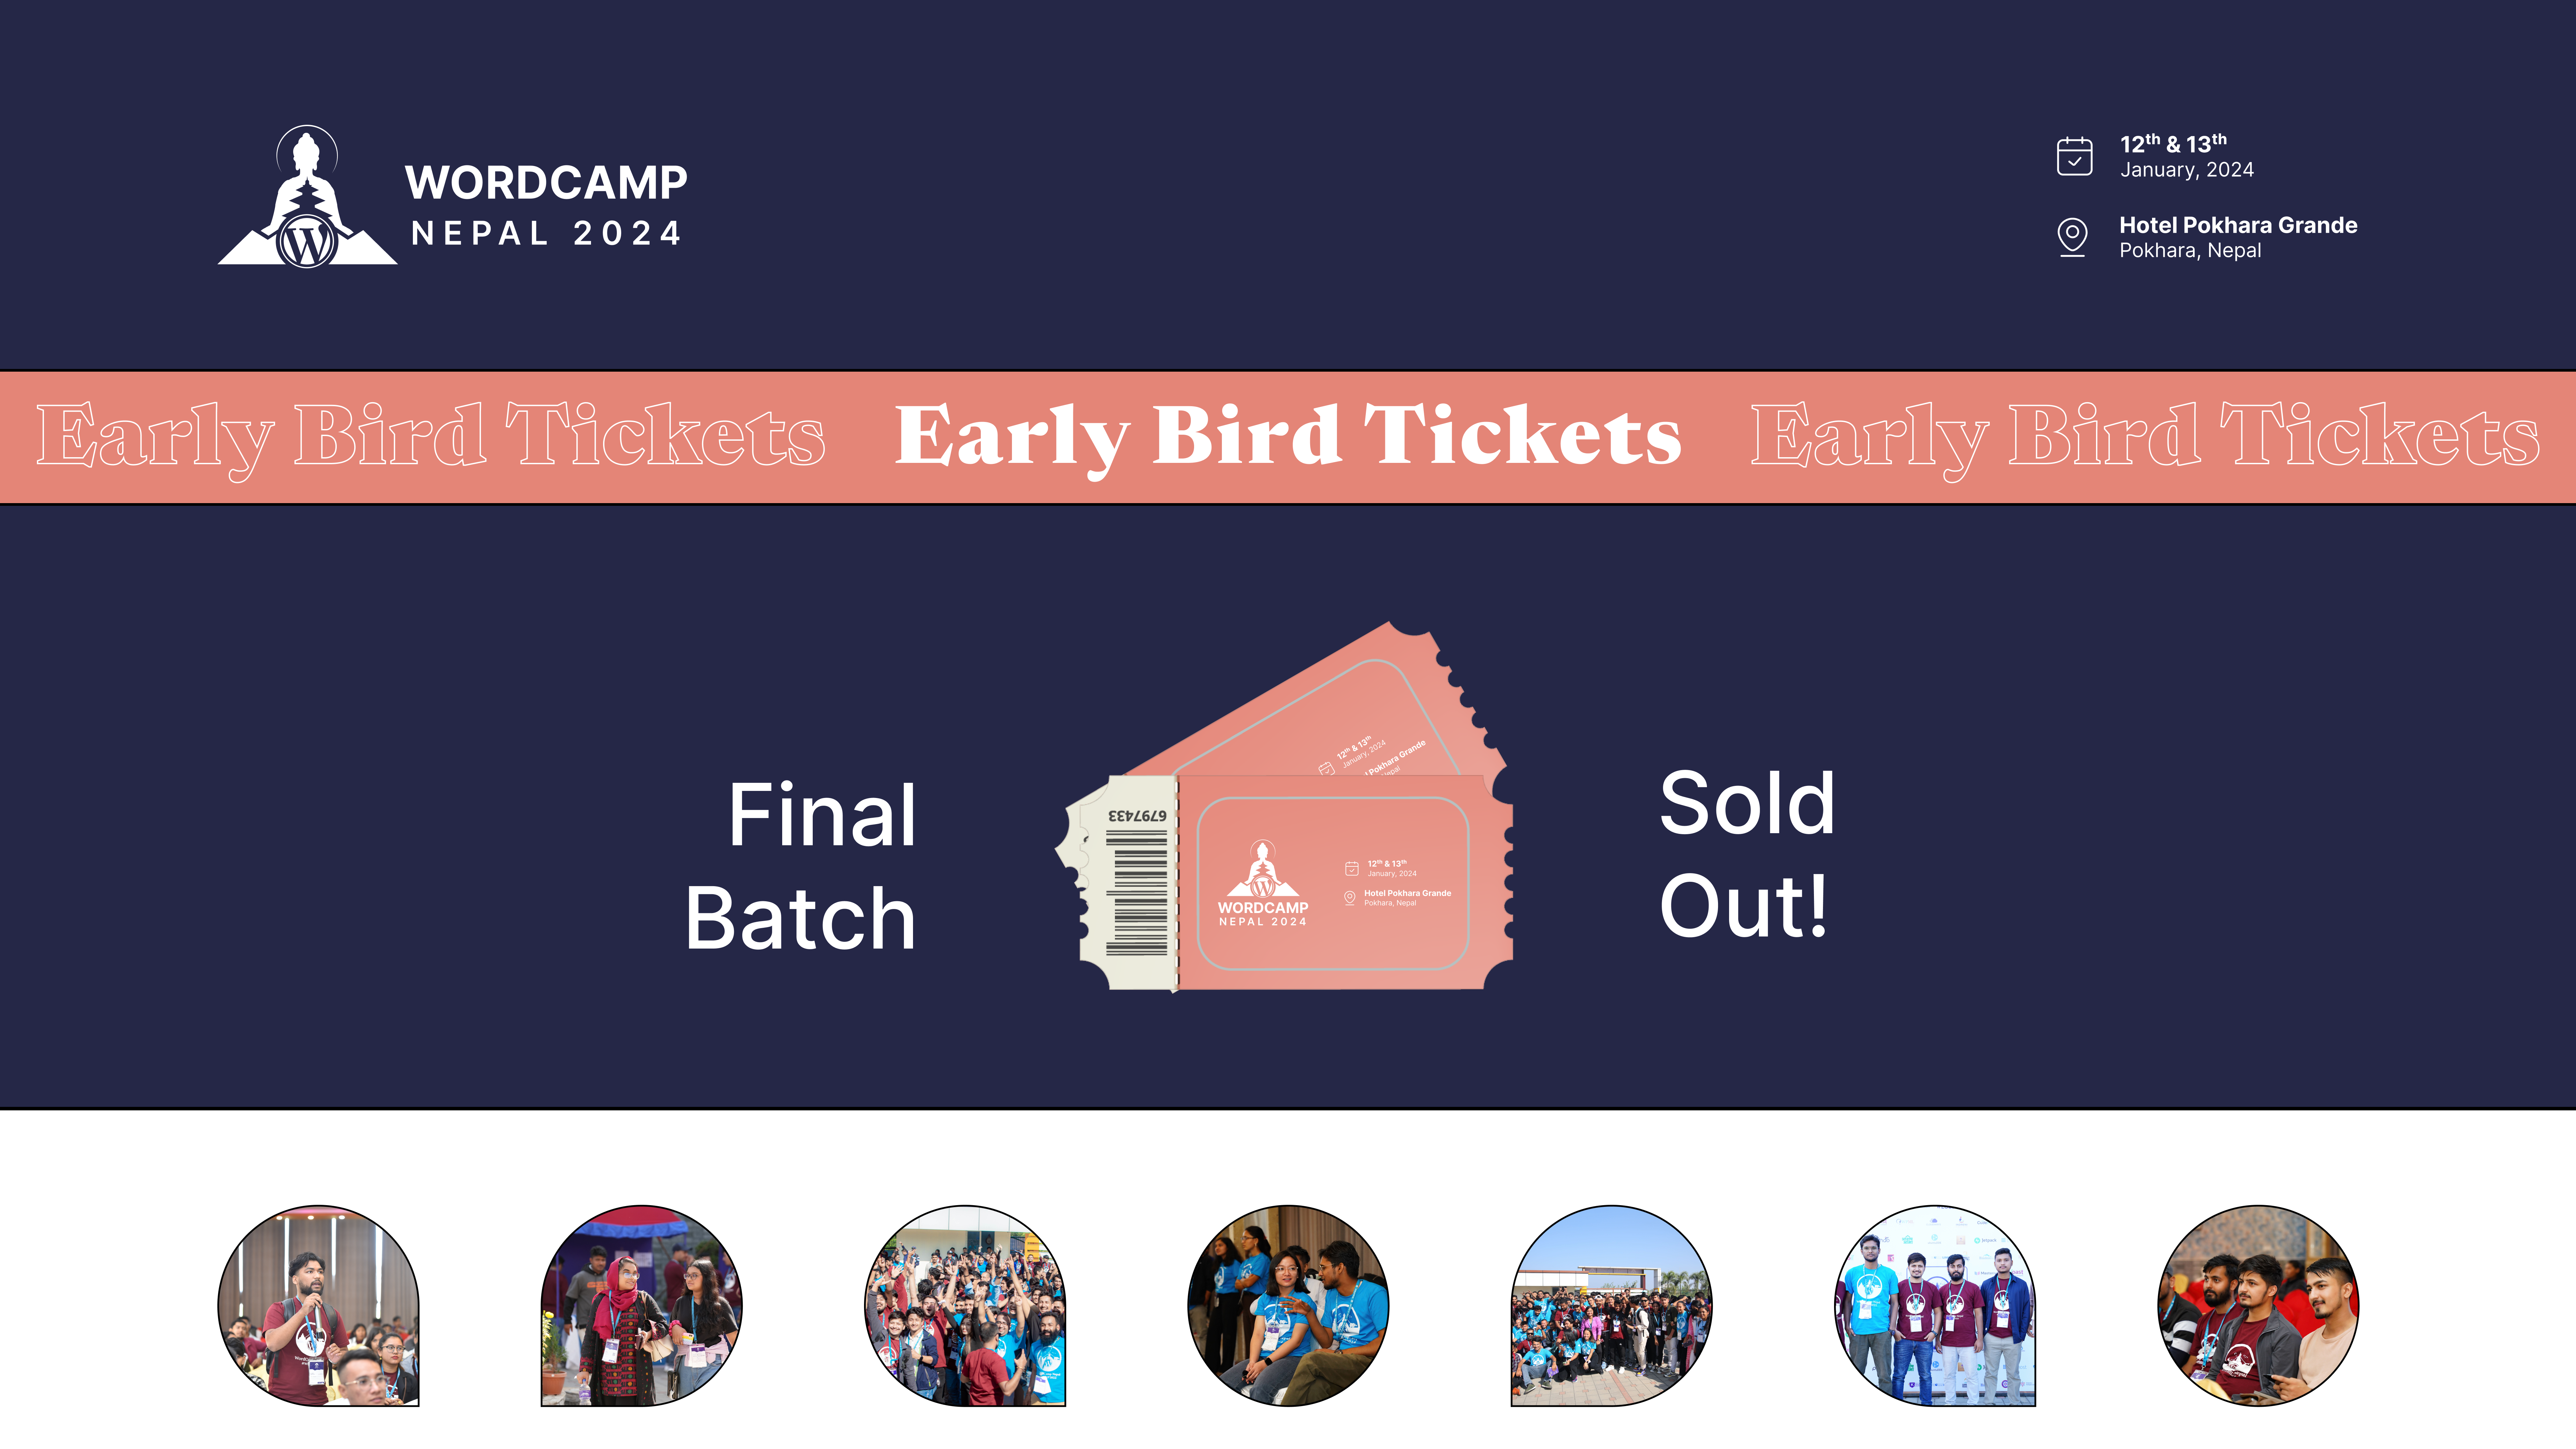 Final Batch of Early Bird Tickets – SOLD OUT!